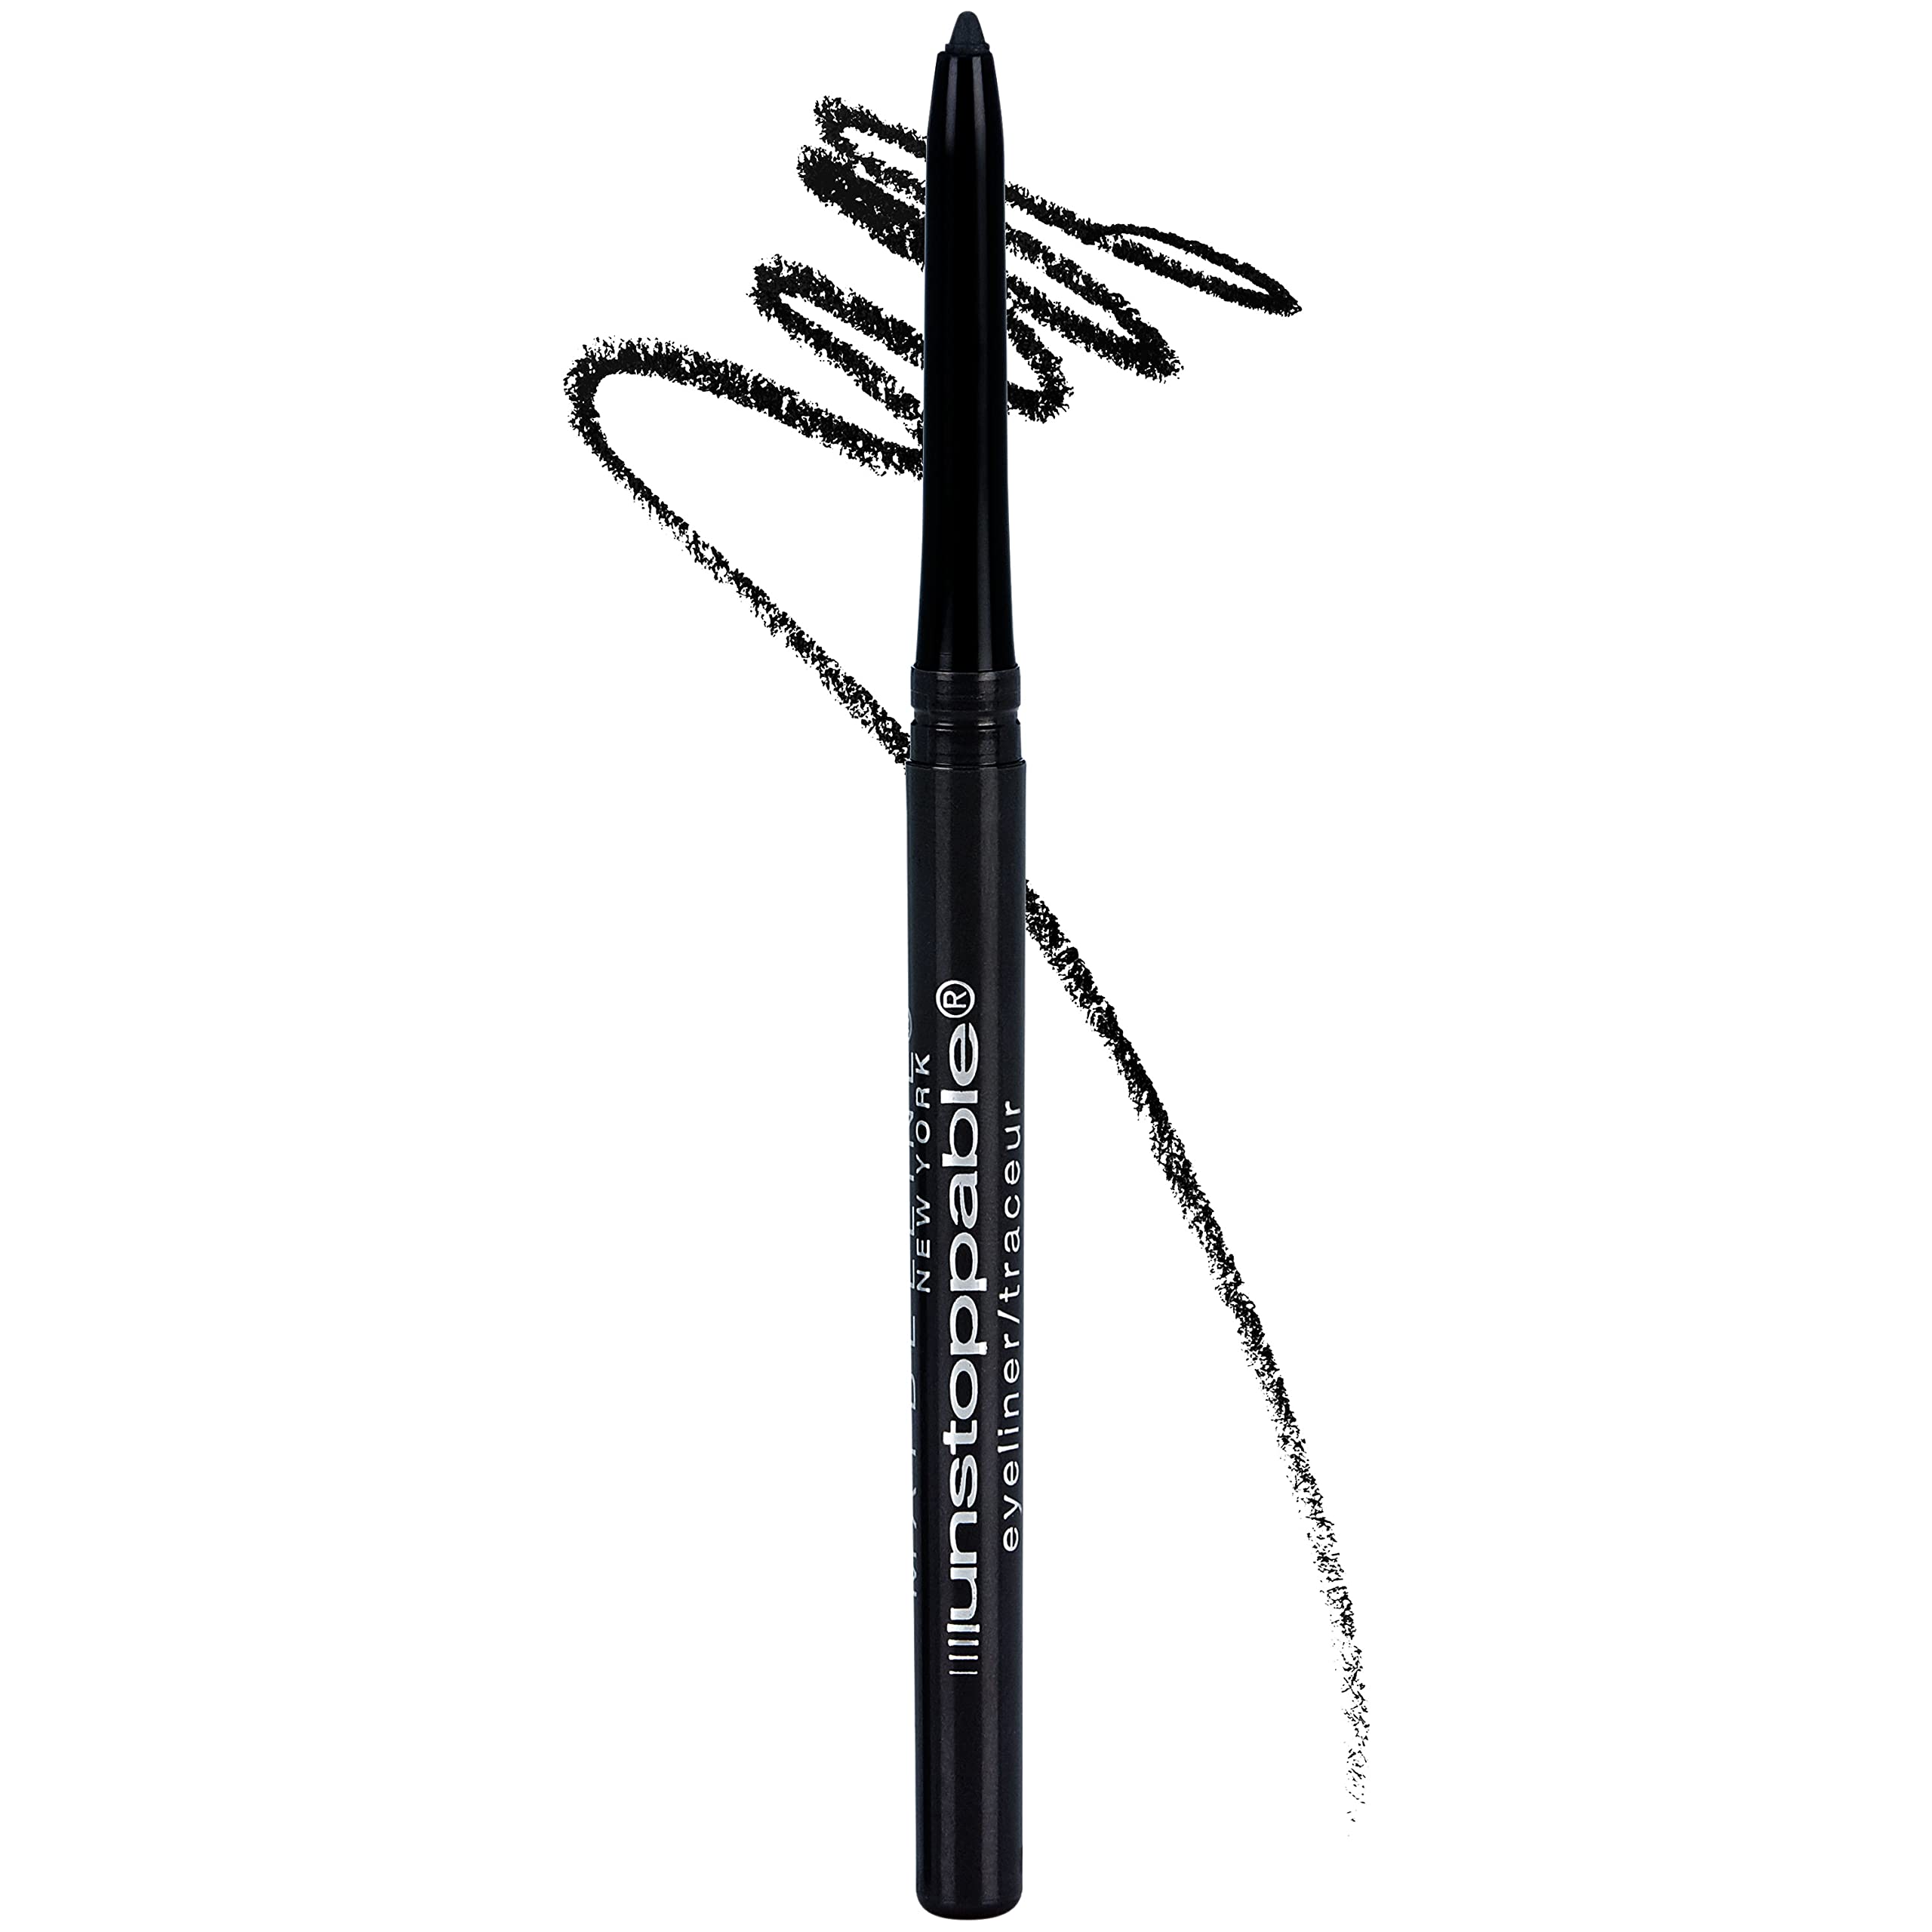 Maybelline Colossal Liner Review: Features & How To Apply ⋆ CashKaro.com